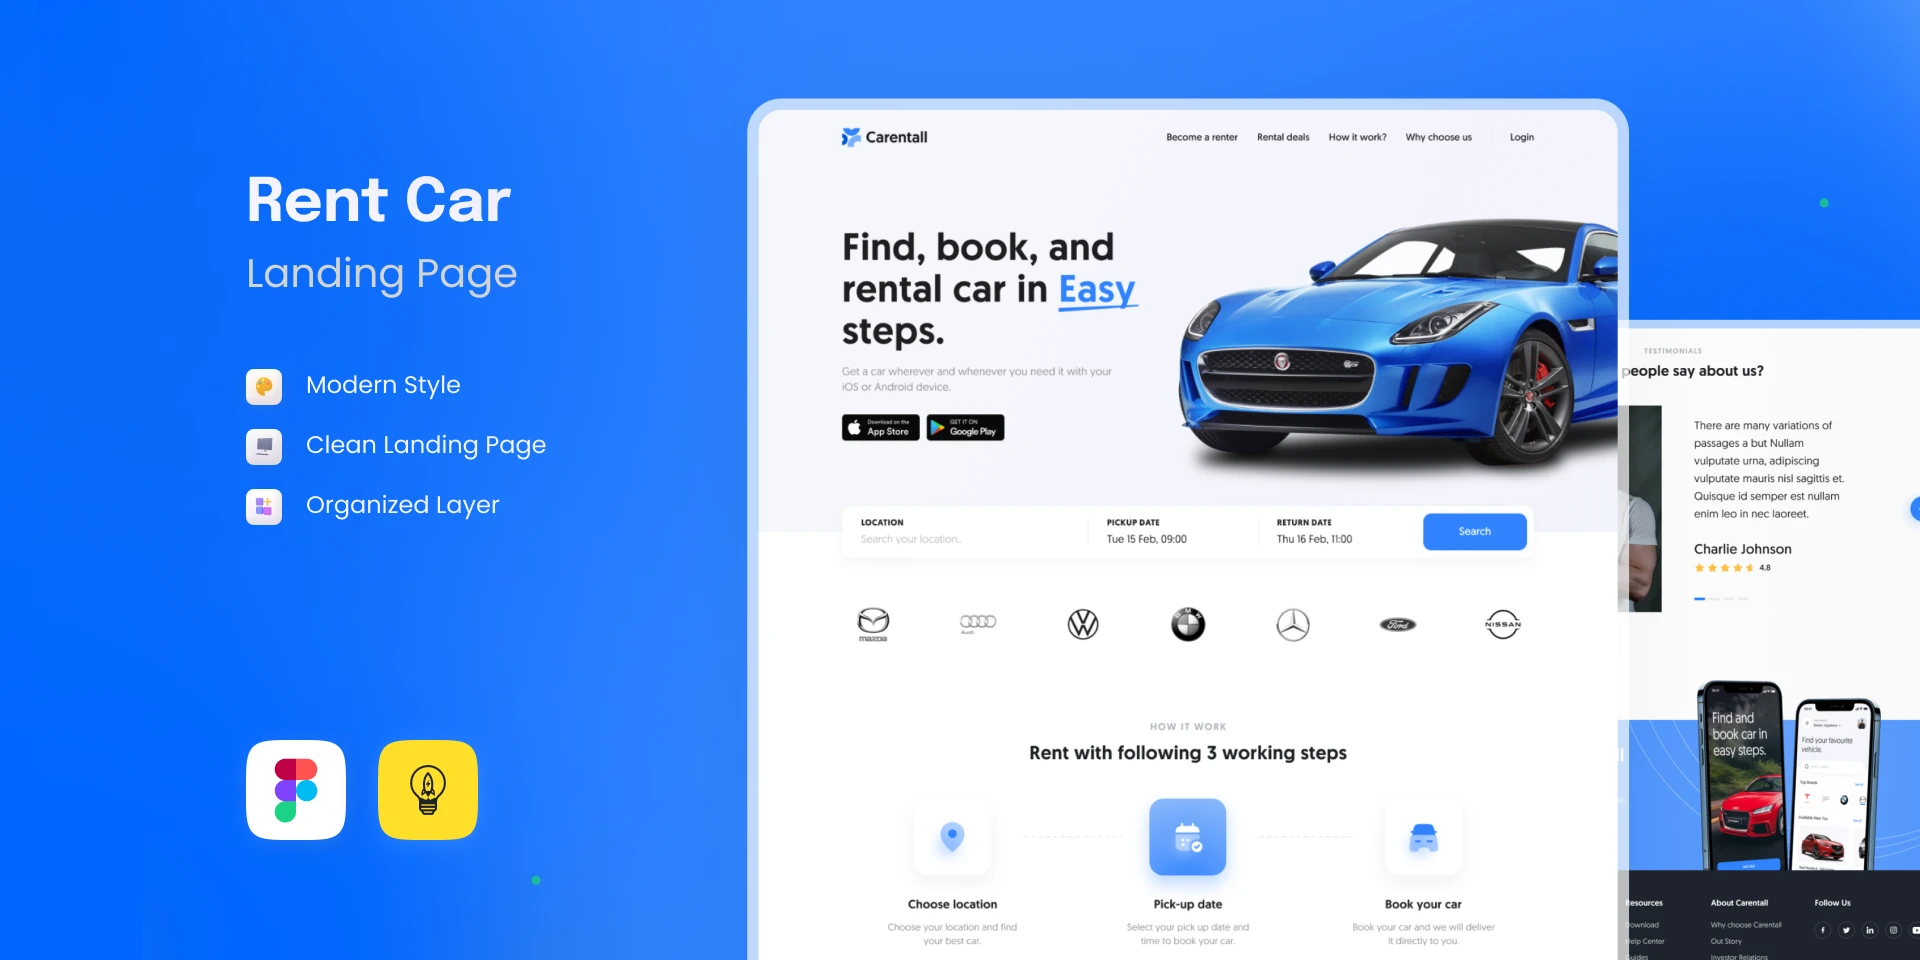 Rental Car Web Design - Only $2 for Figma and Adobe XD